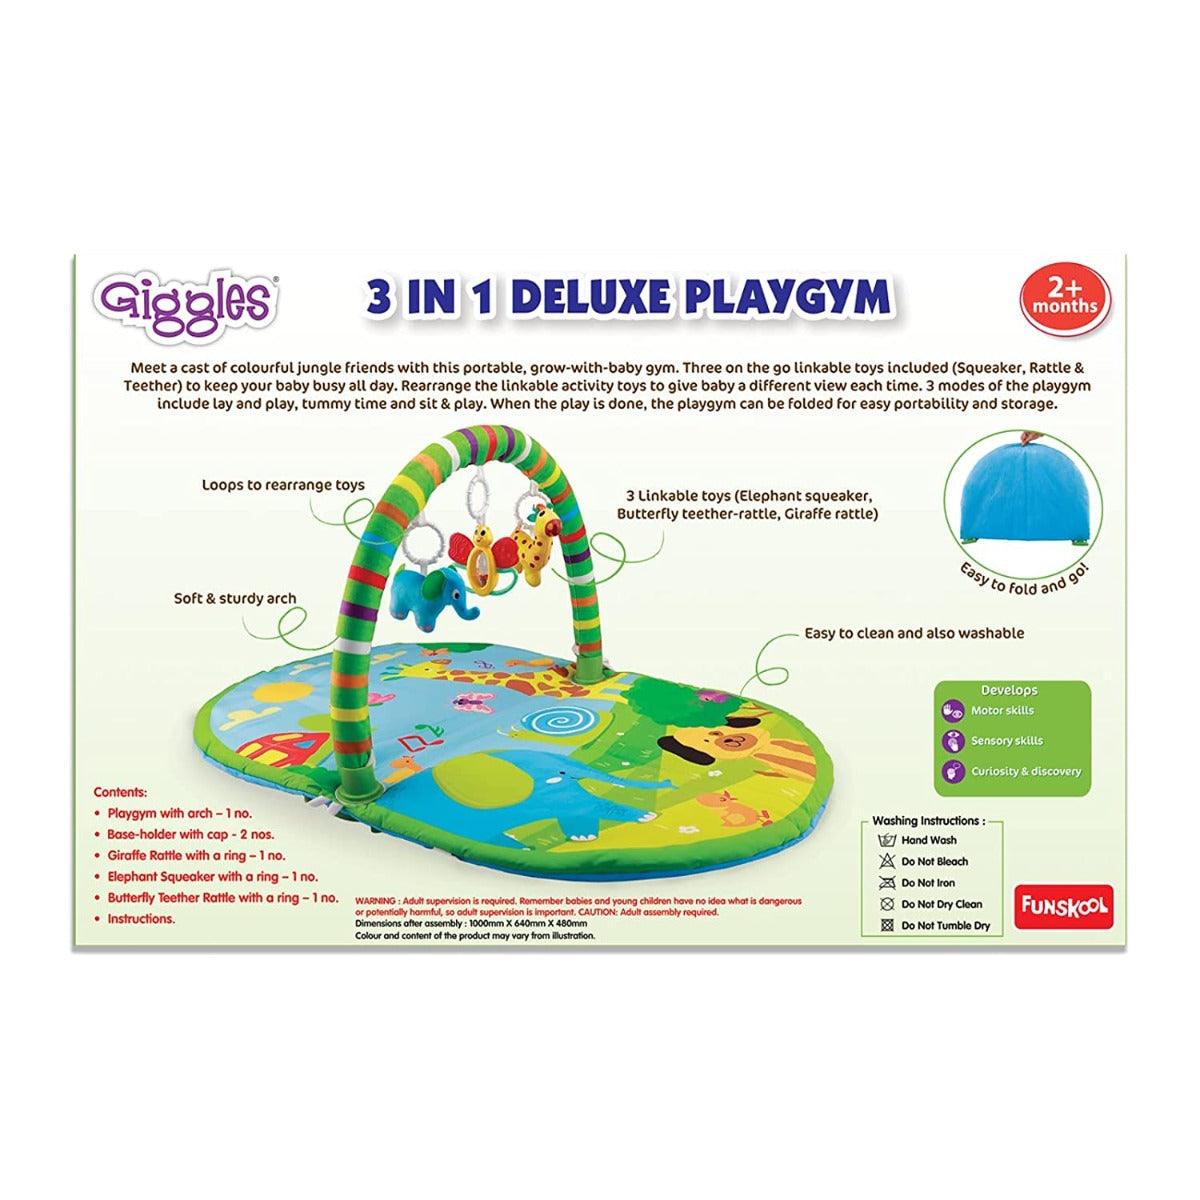 Giggles 3 In 1 Deluxe Playgym For Ages 0-3 Years | Funskool | sams toy - samstoy.in